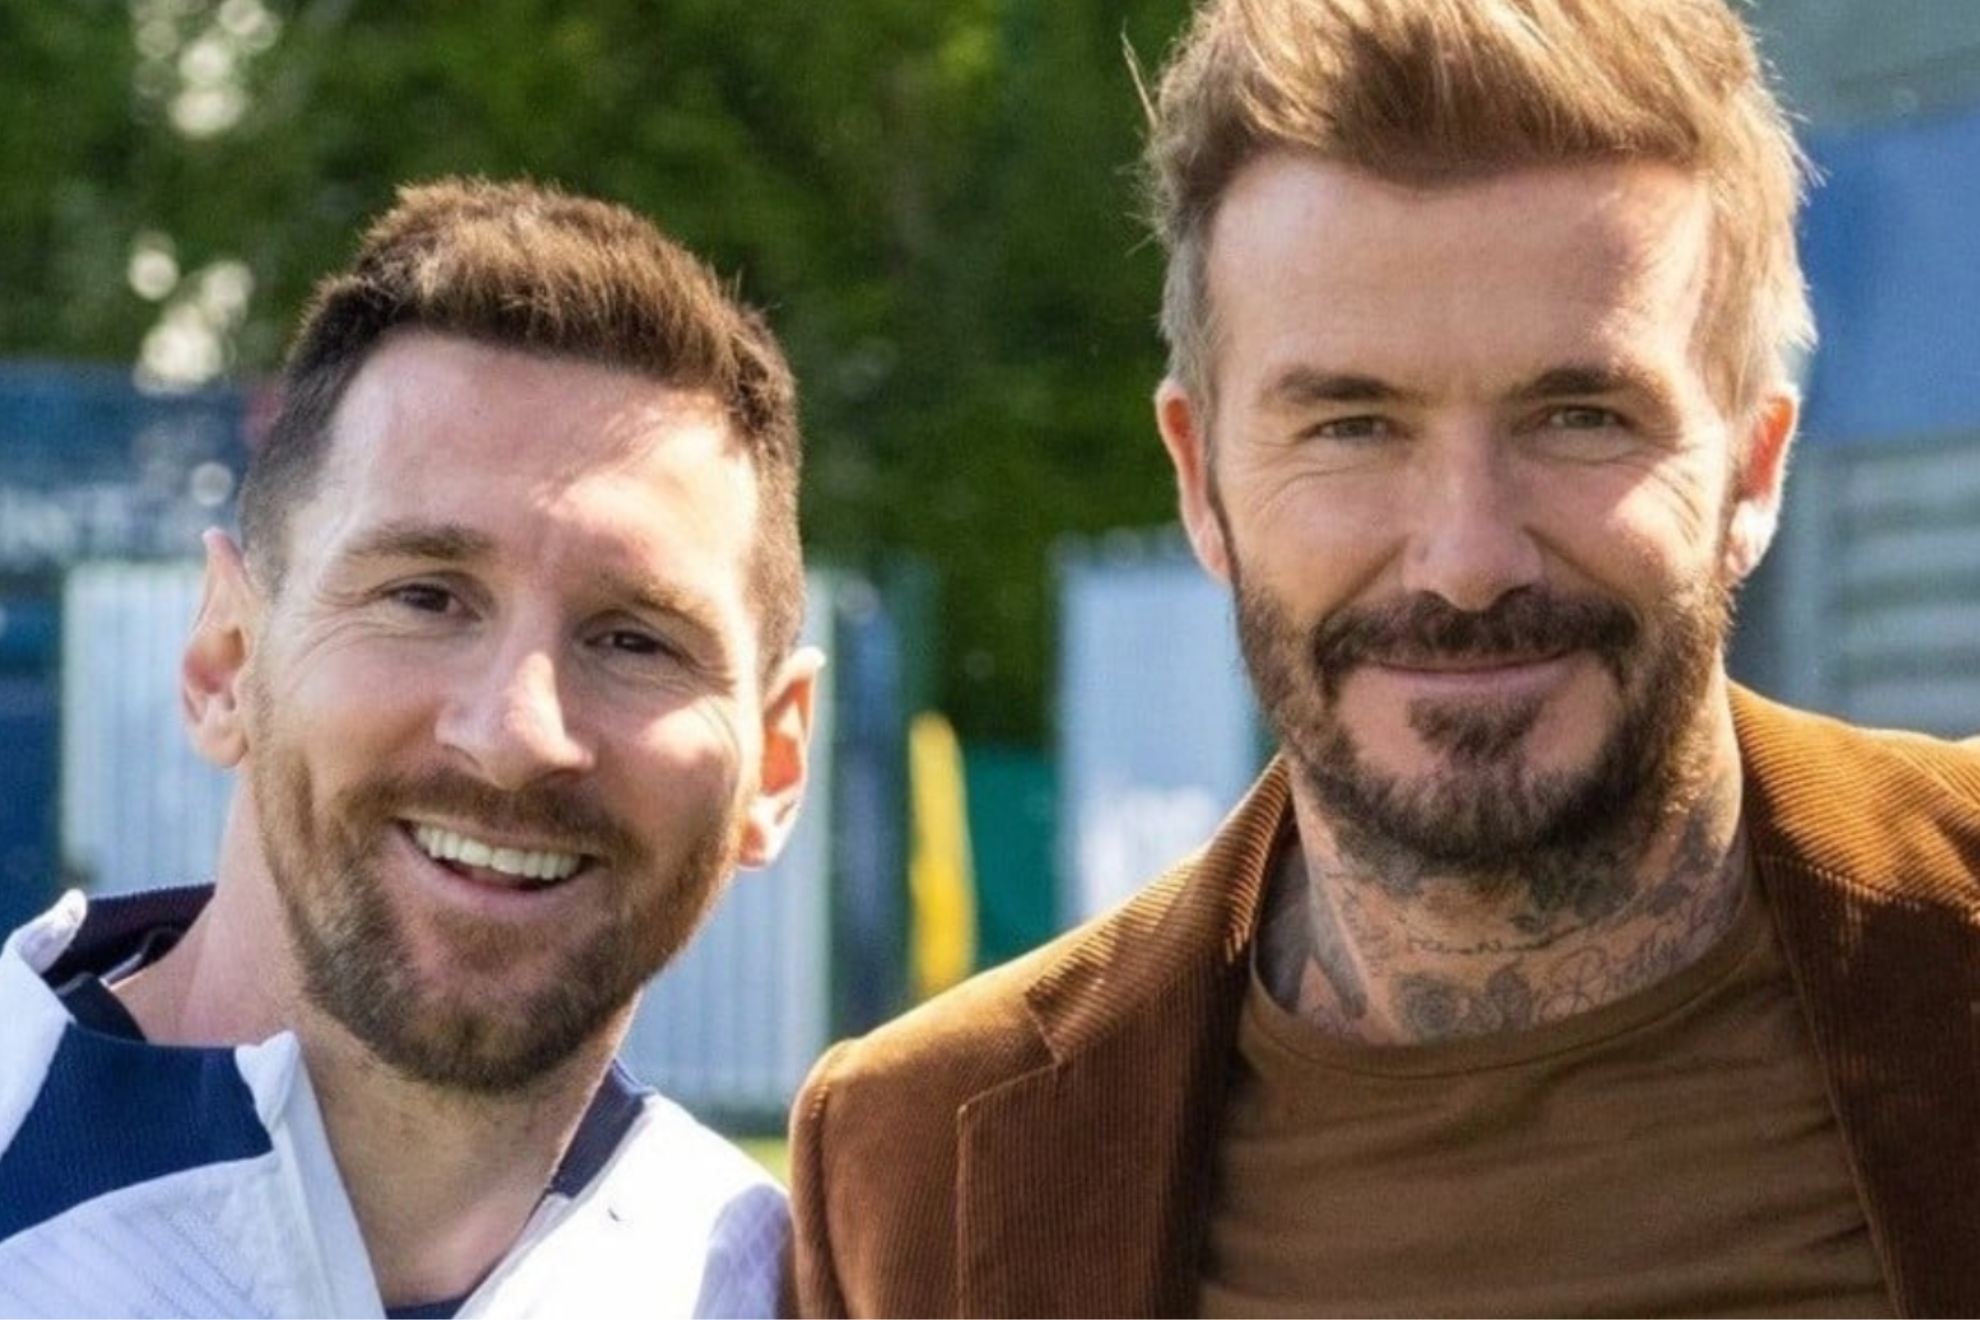 Beckham has recruited Messi to join his MLS franchise, Inter Miami